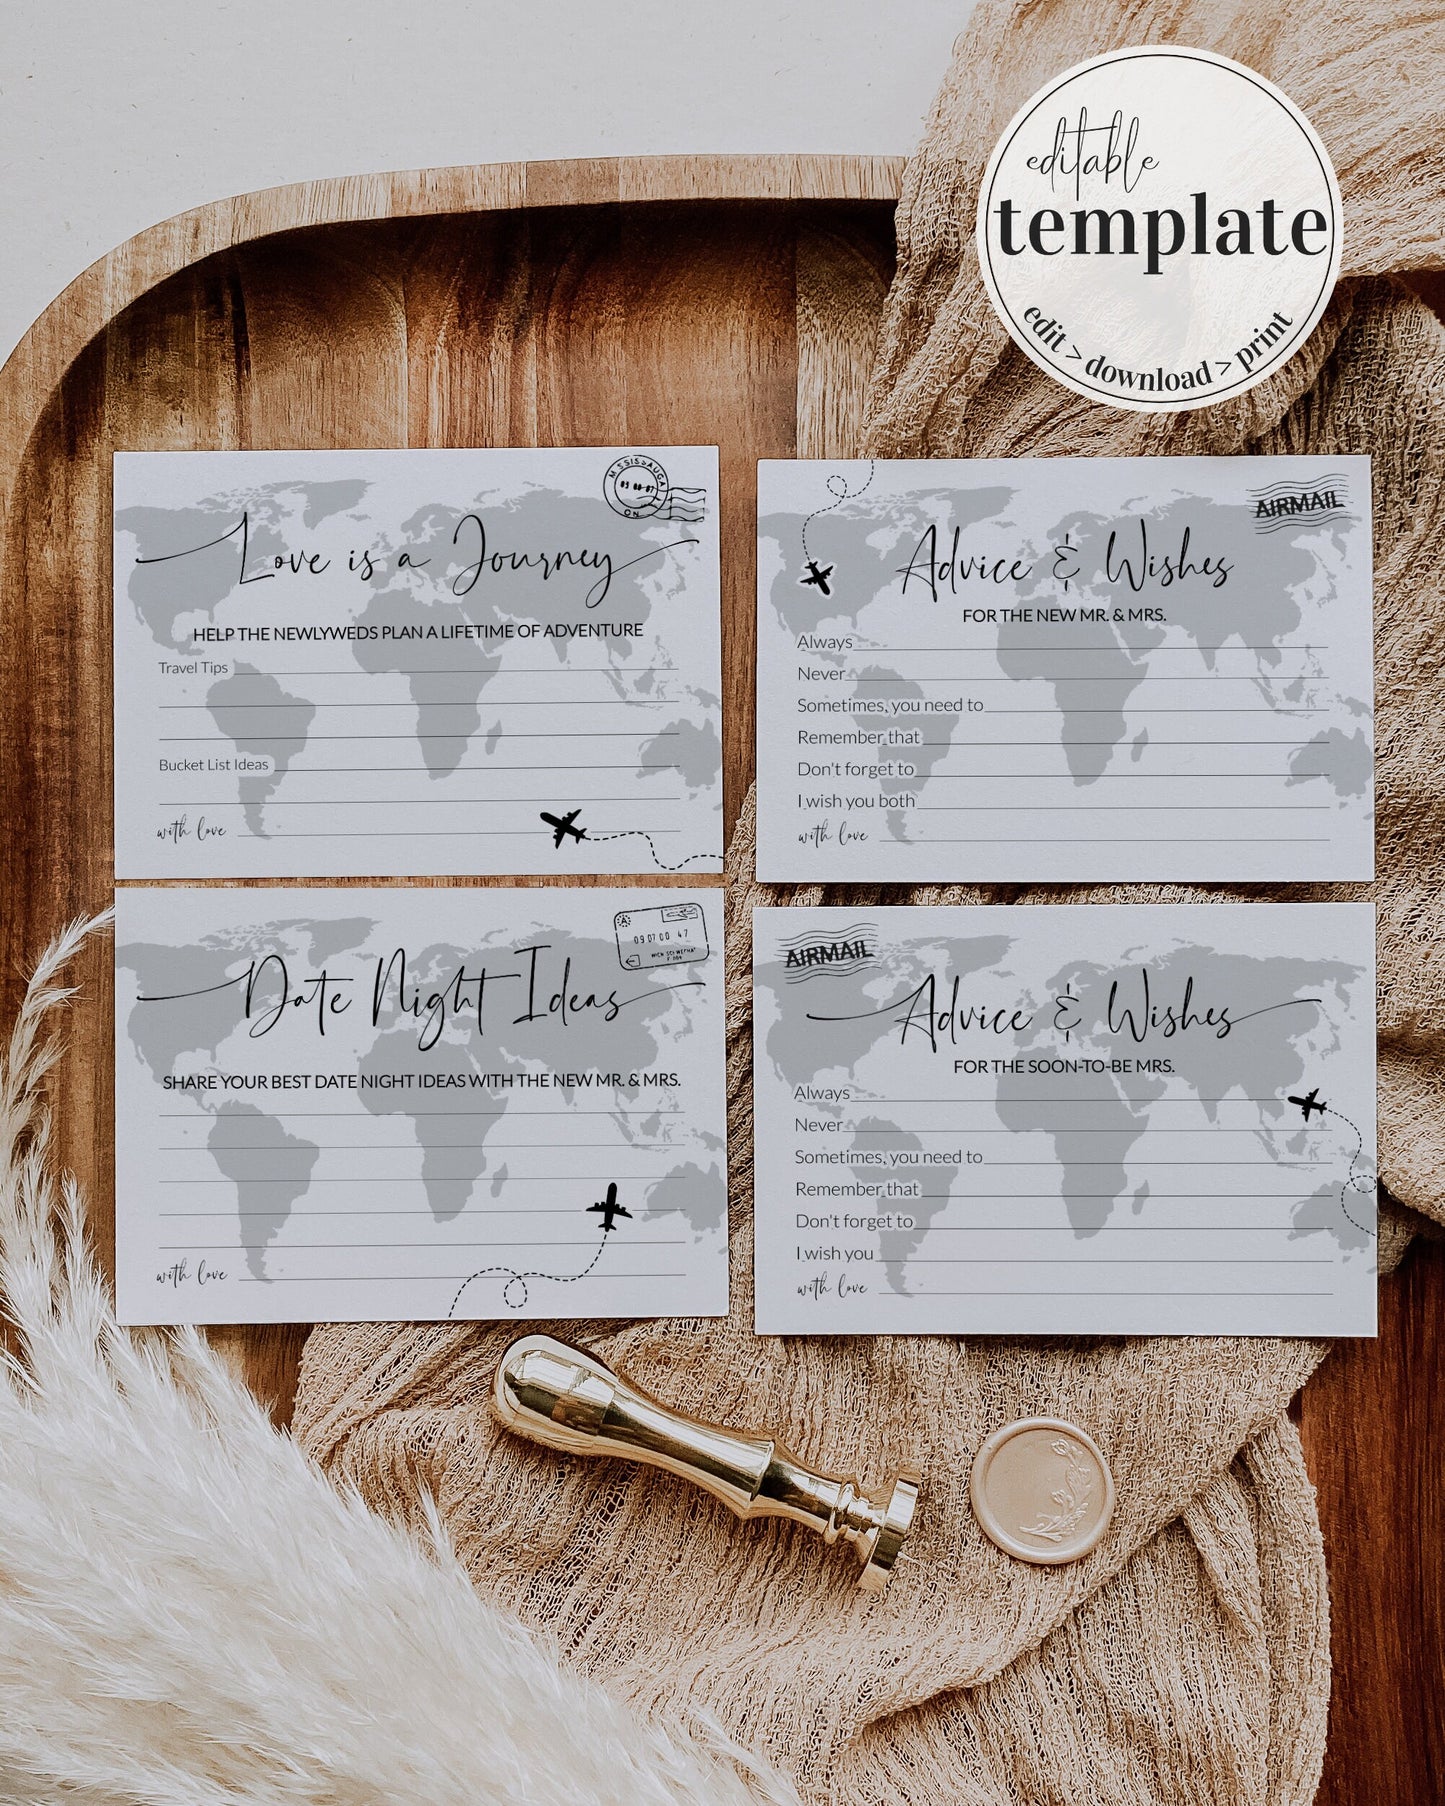 Advice and Wishes Card Bundle with Date Night Ideas and Love is a Journey Card, Bridal Shower Advice Card Template for travel party #072w